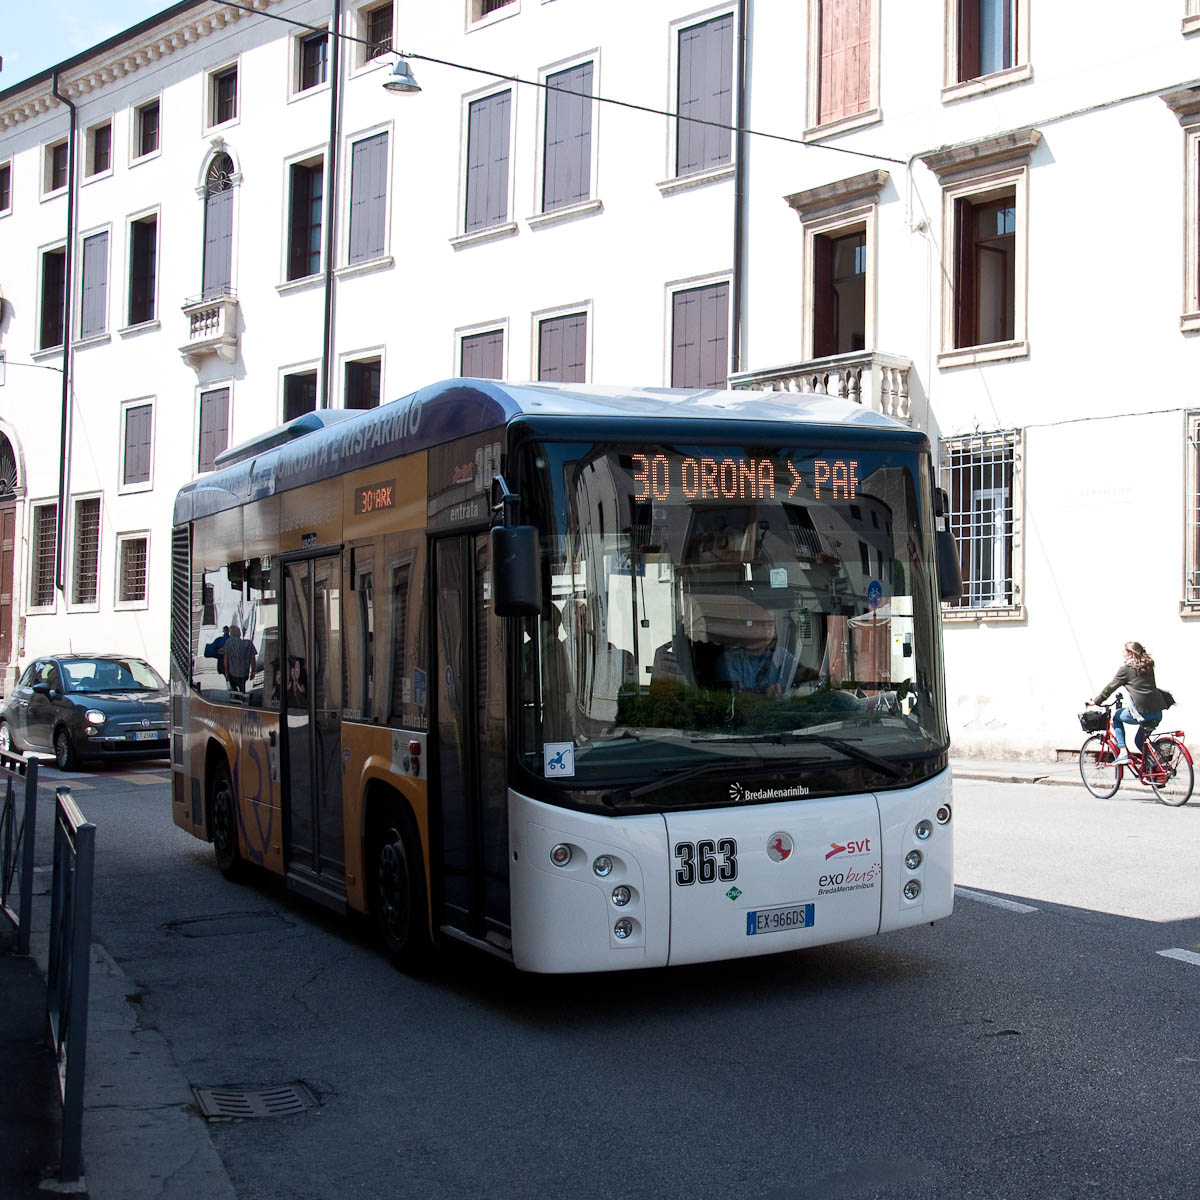 Tiny bus, Vicenza, Italy - www.rossiwrites.com